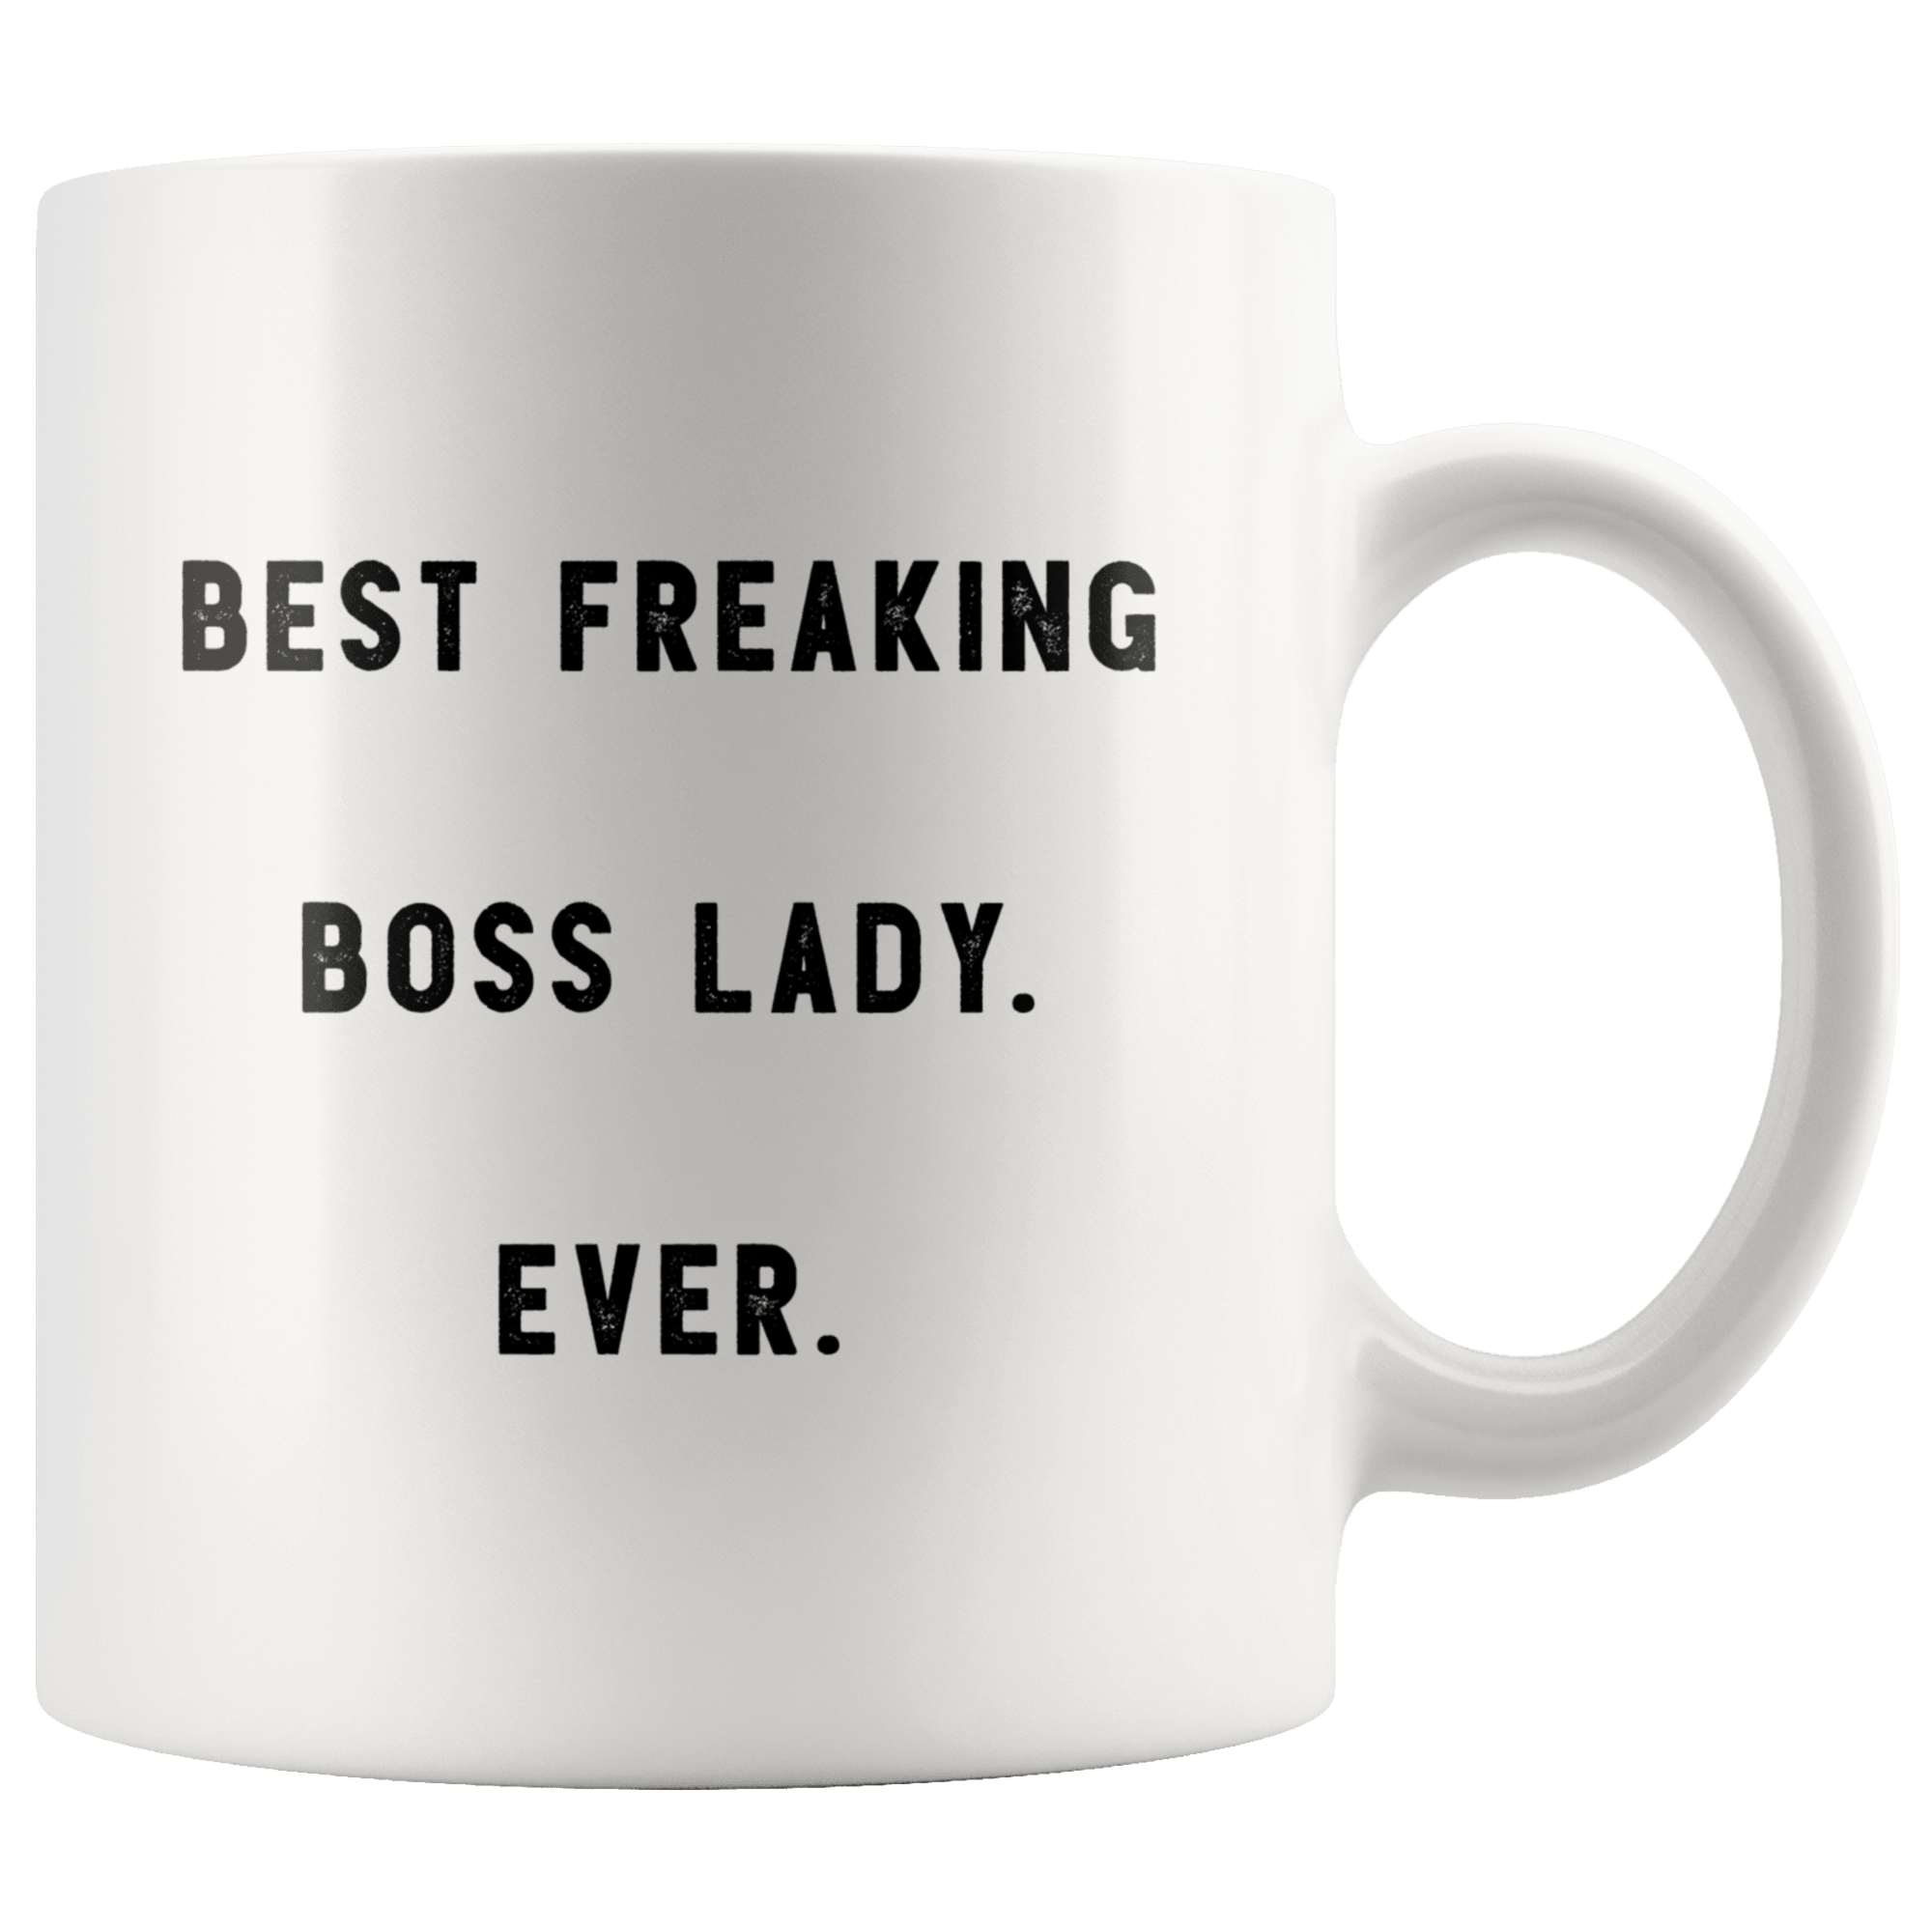 gag gift ideas for coworkers